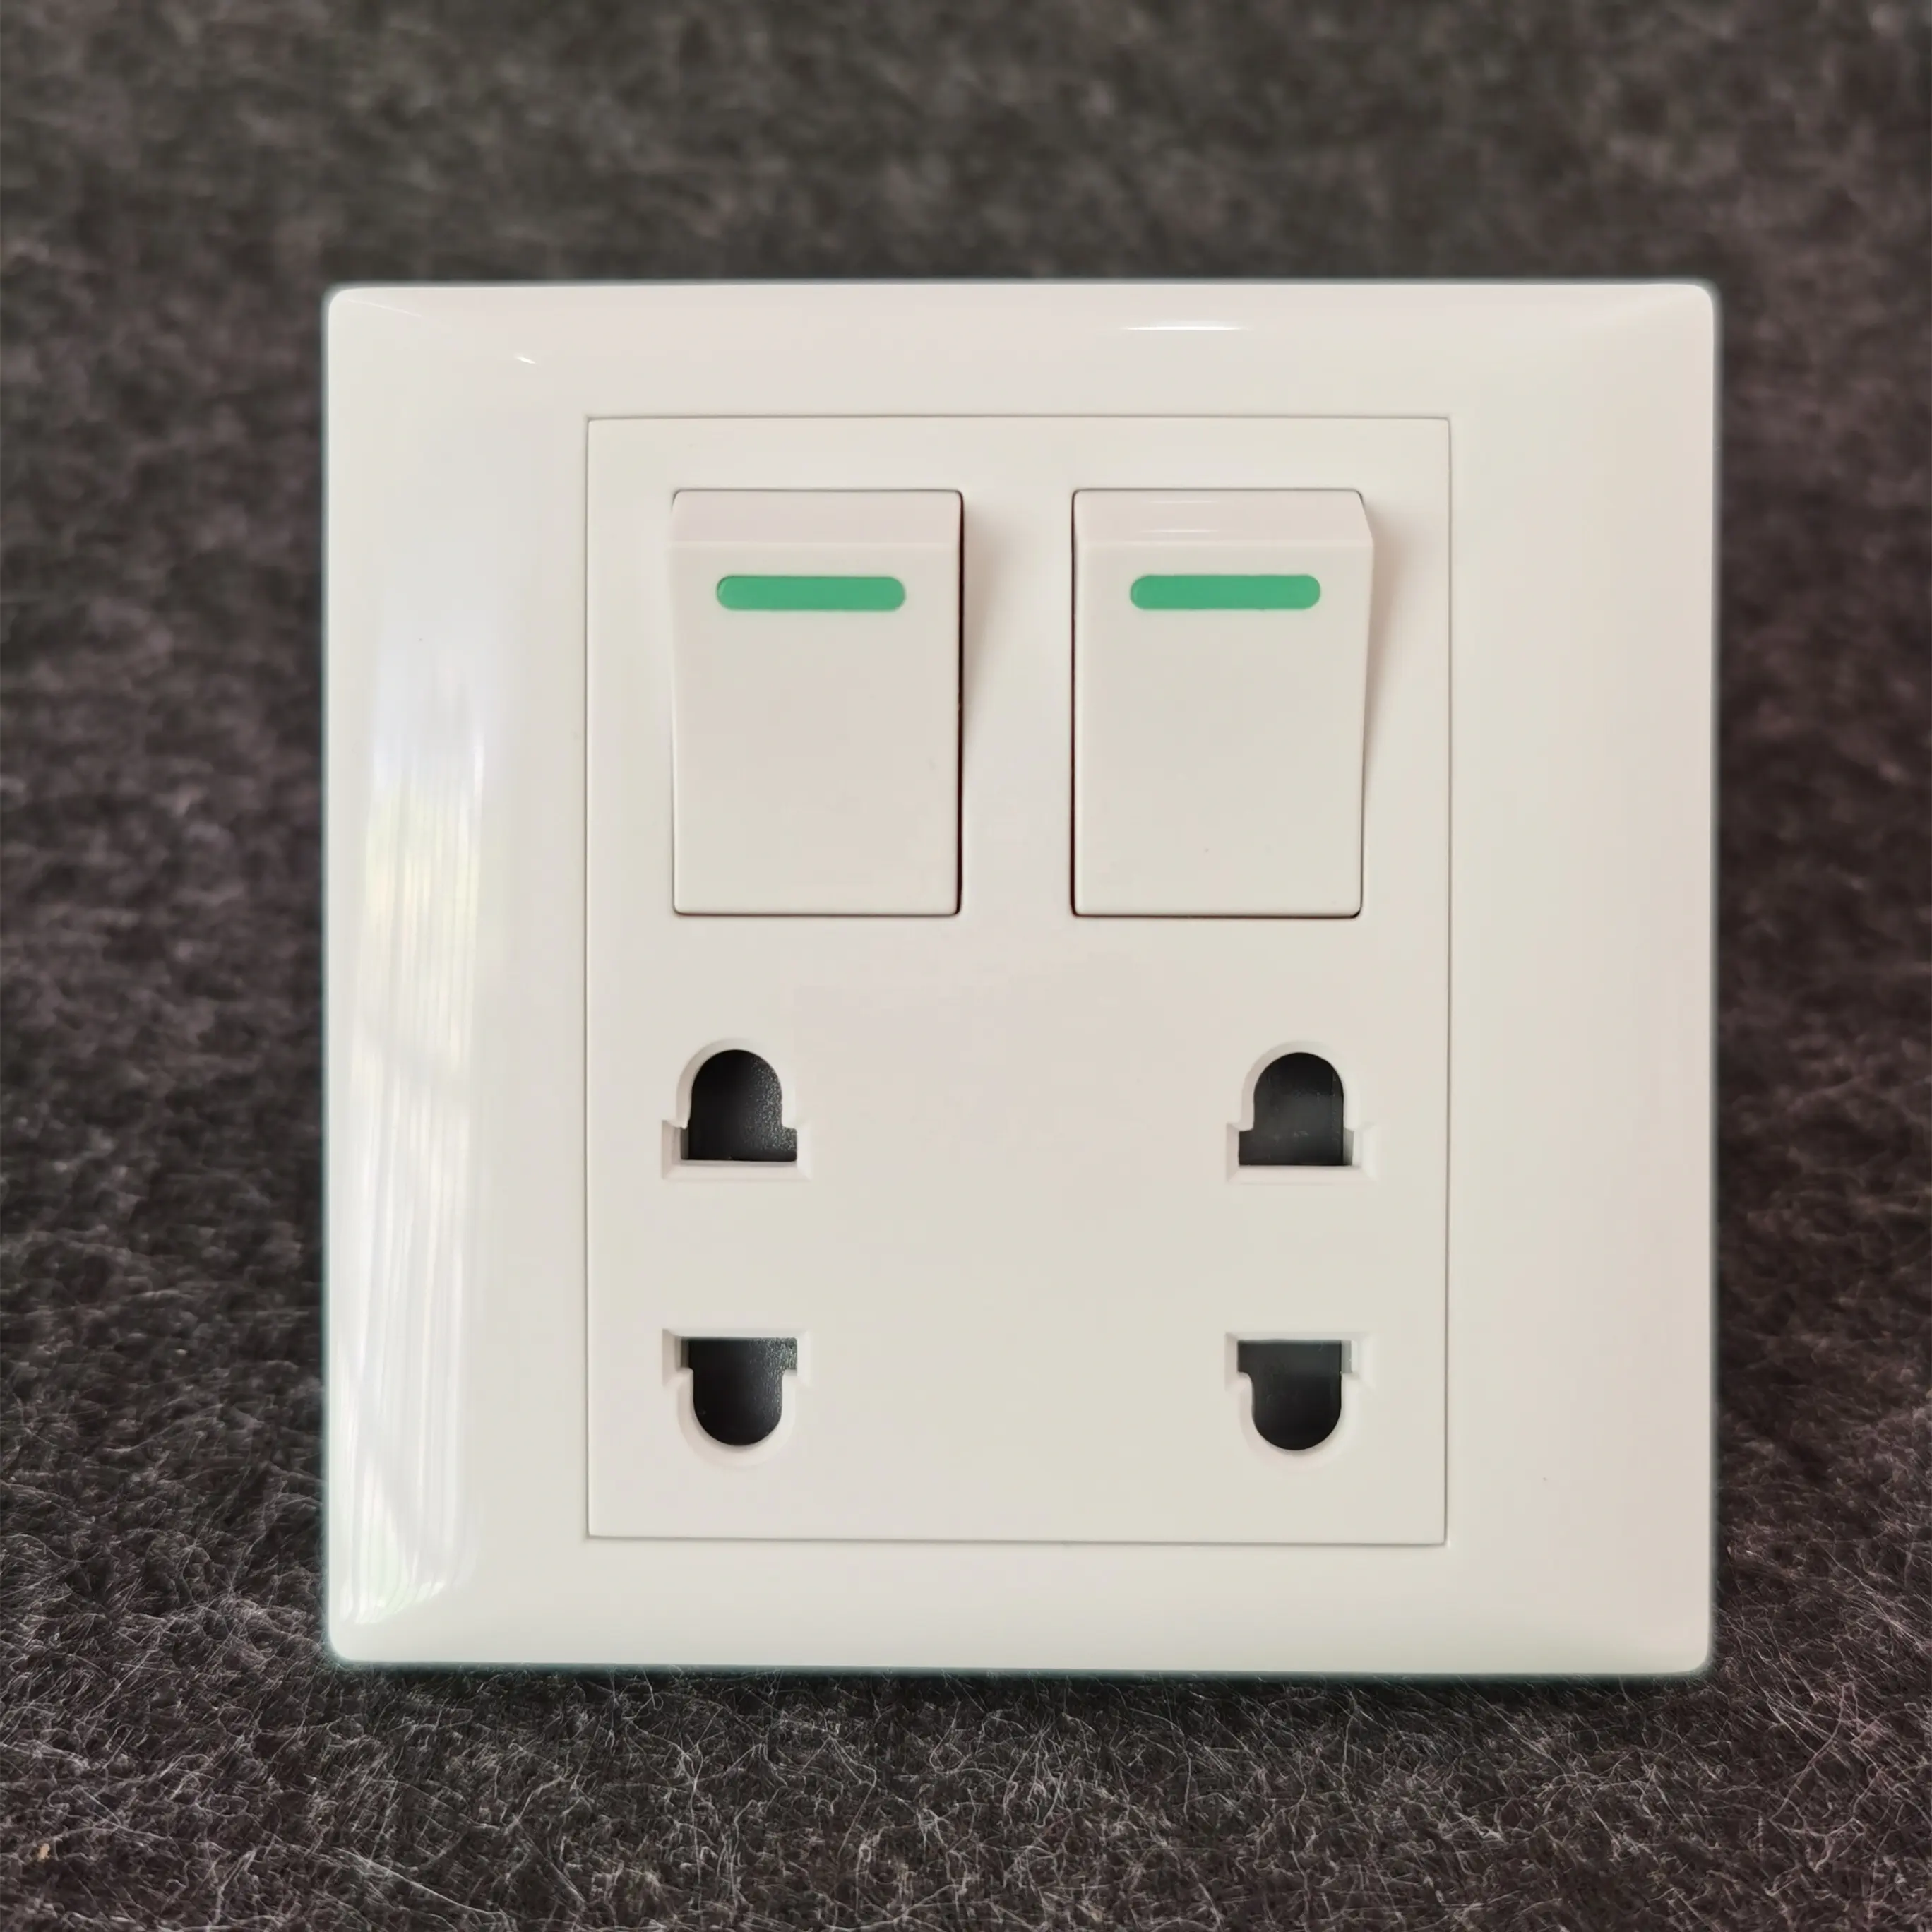 JN Exported to Cambodia and Myanmar Hot sale export socket electrical ABS panel 1 way 4 pin socket and light switch